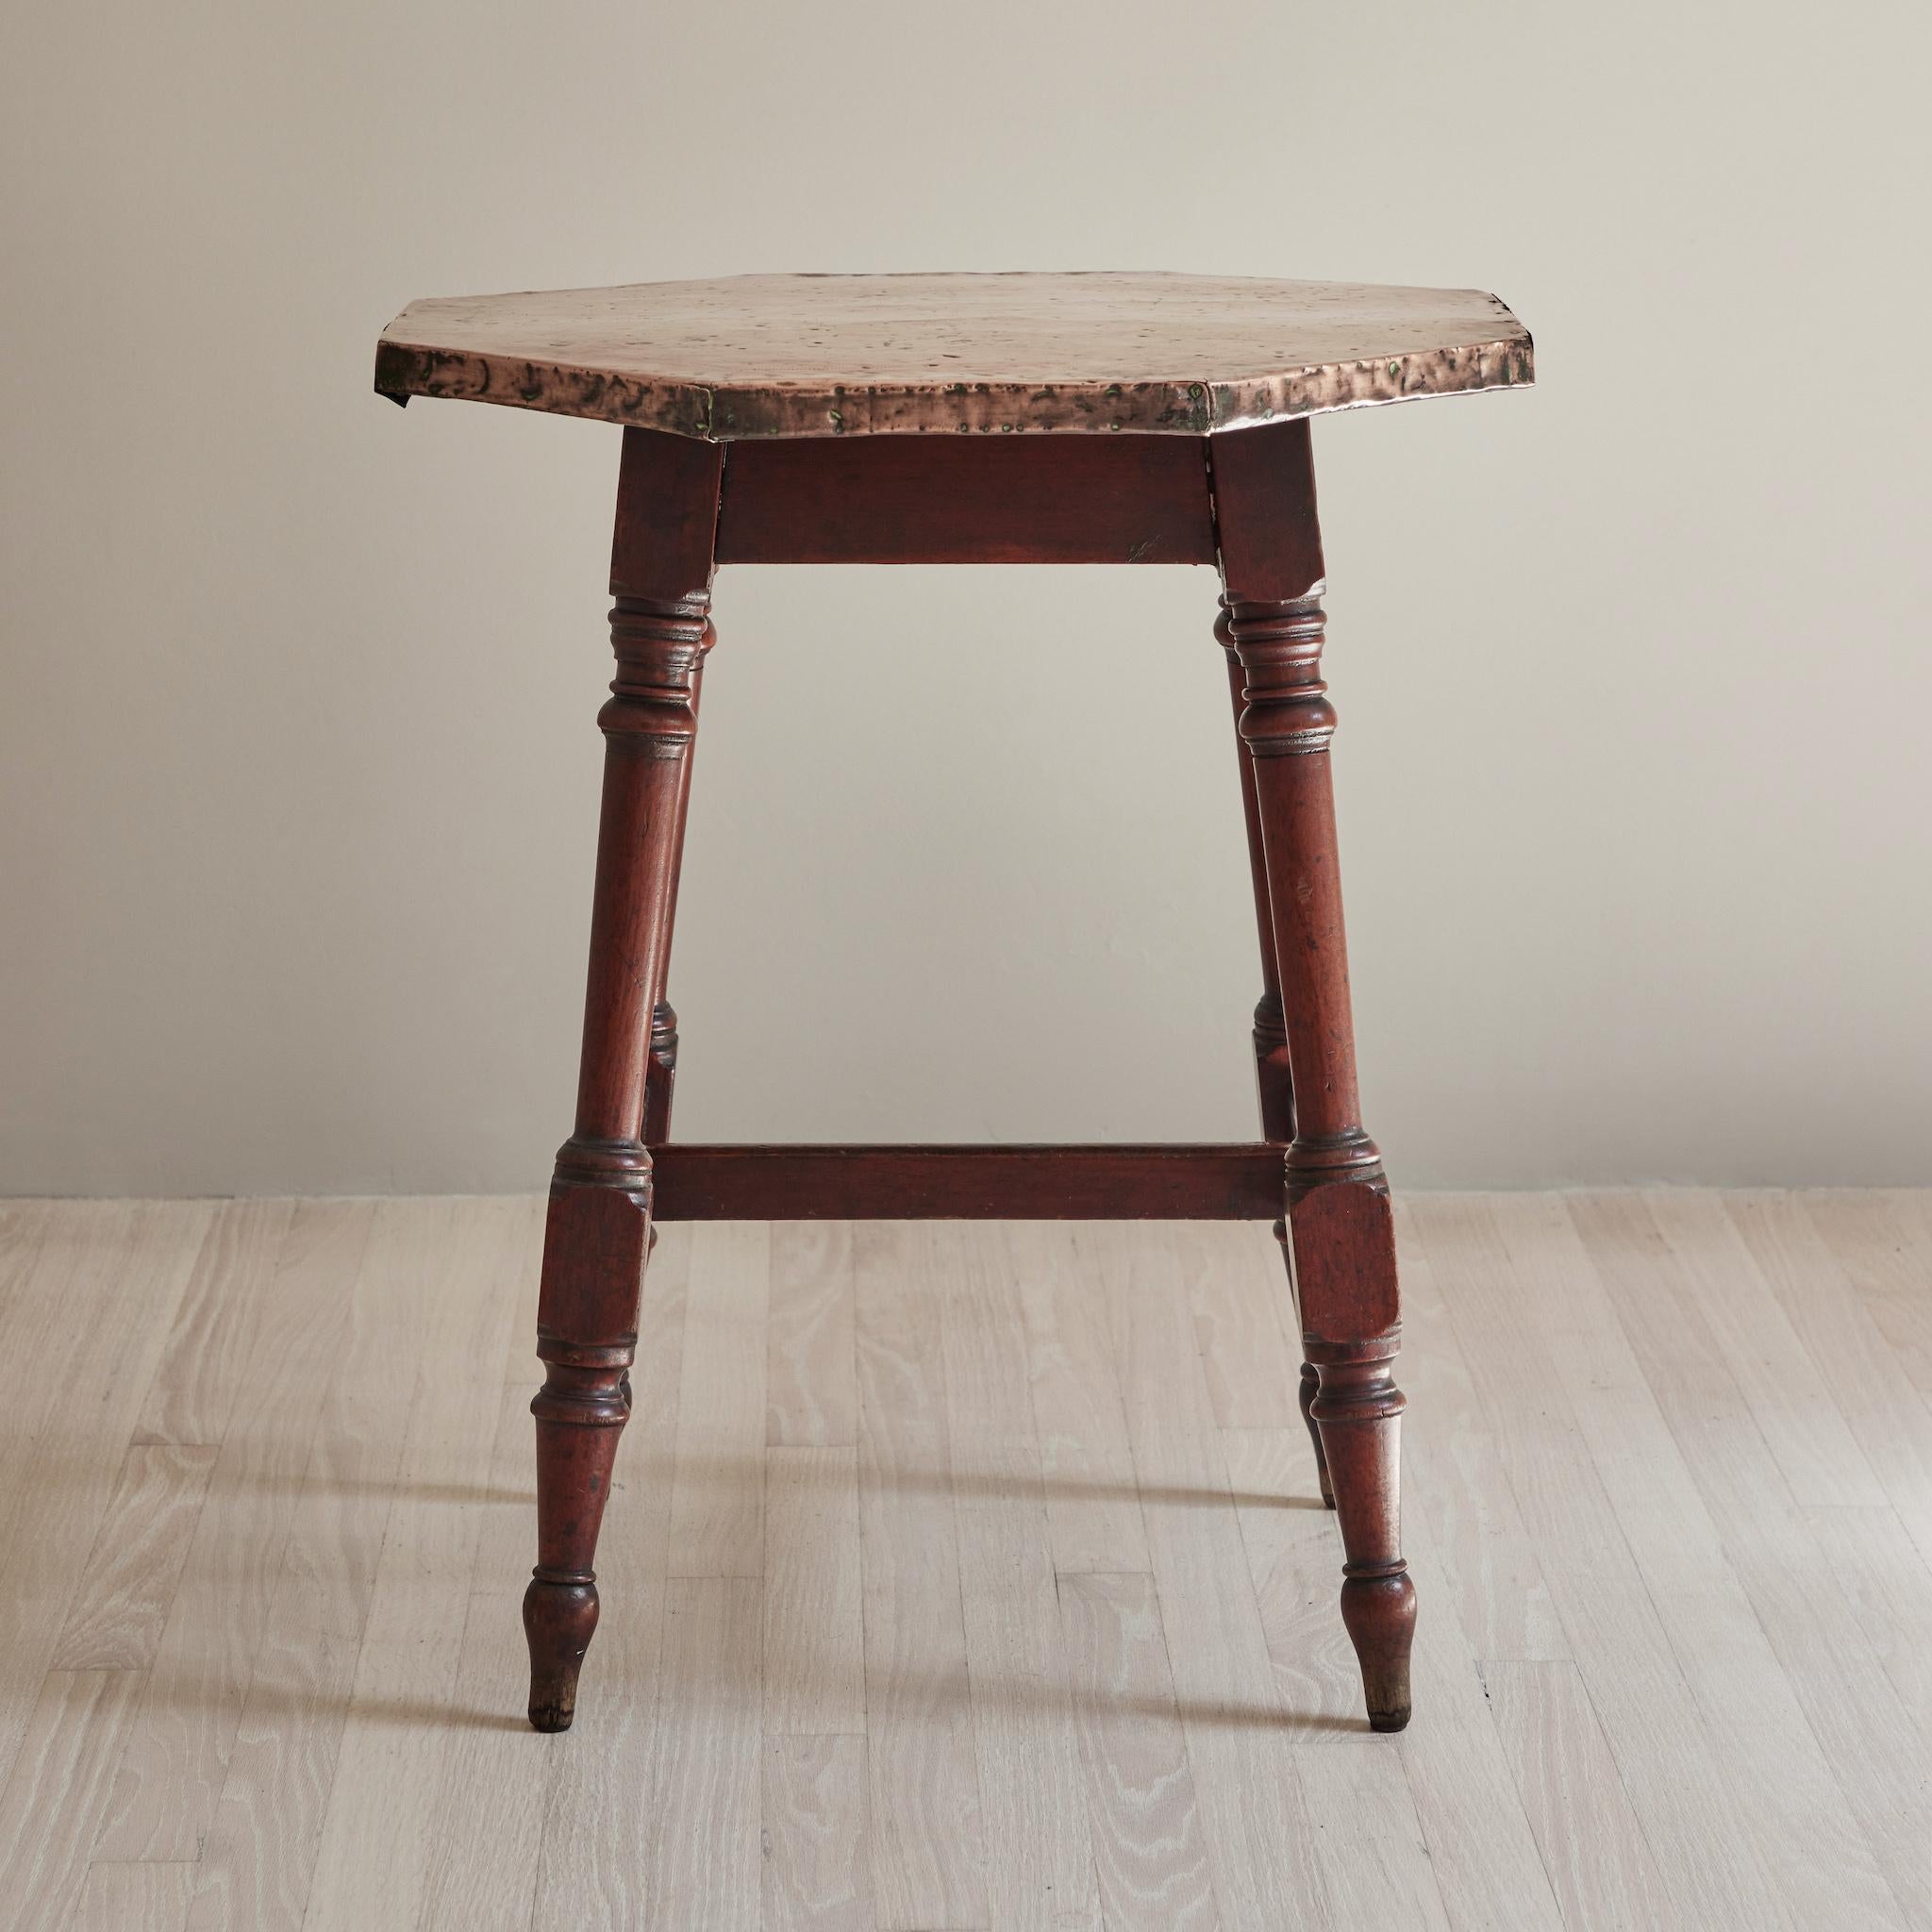 Late 19th Century Copper Top Side Table with Wooden Legs from England 3